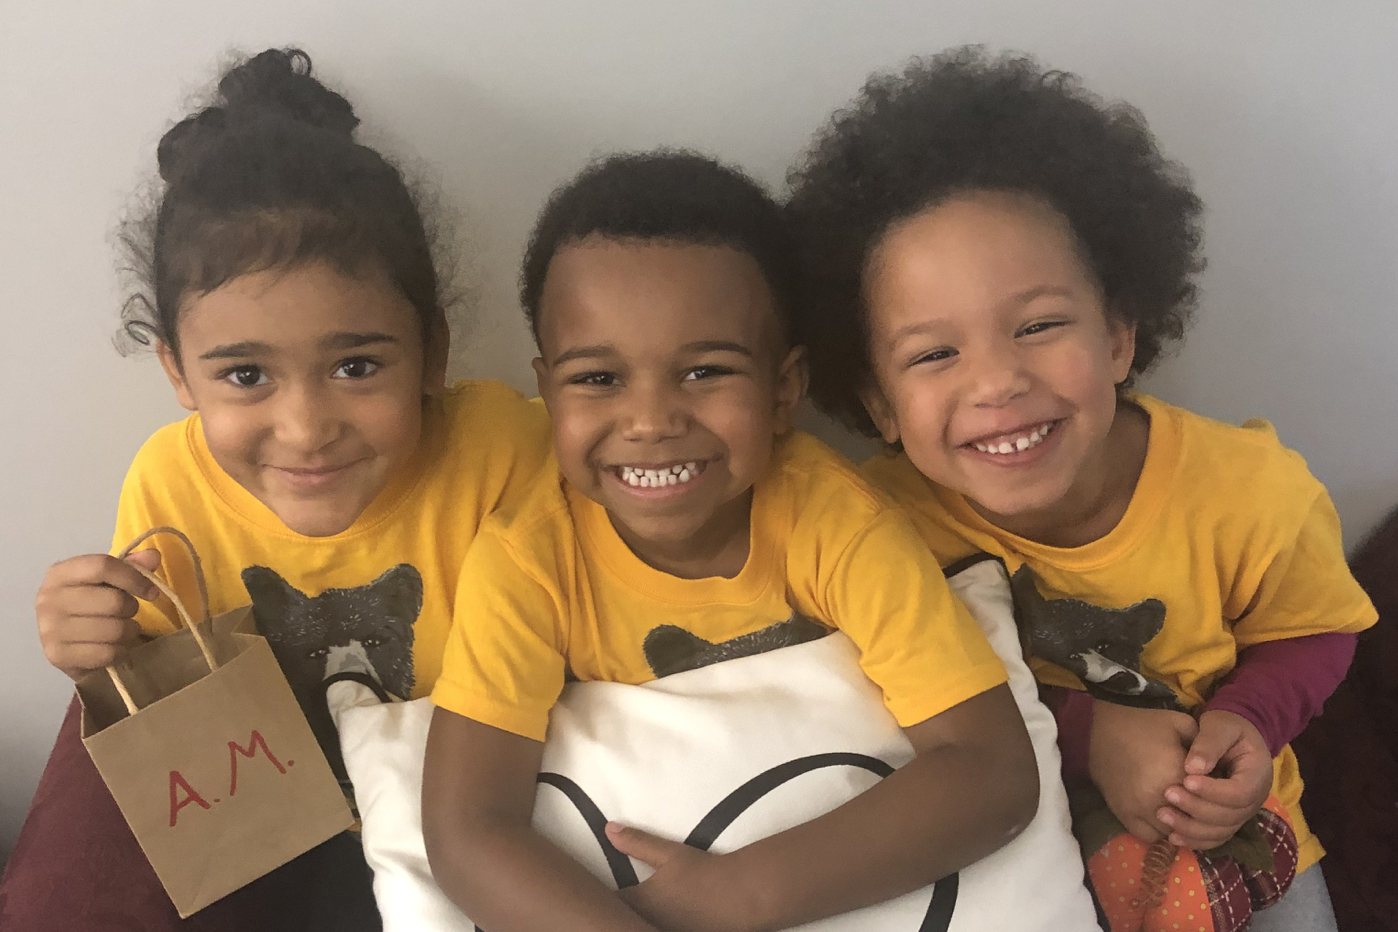 Three children in yellow t-shirts smiling at the camera